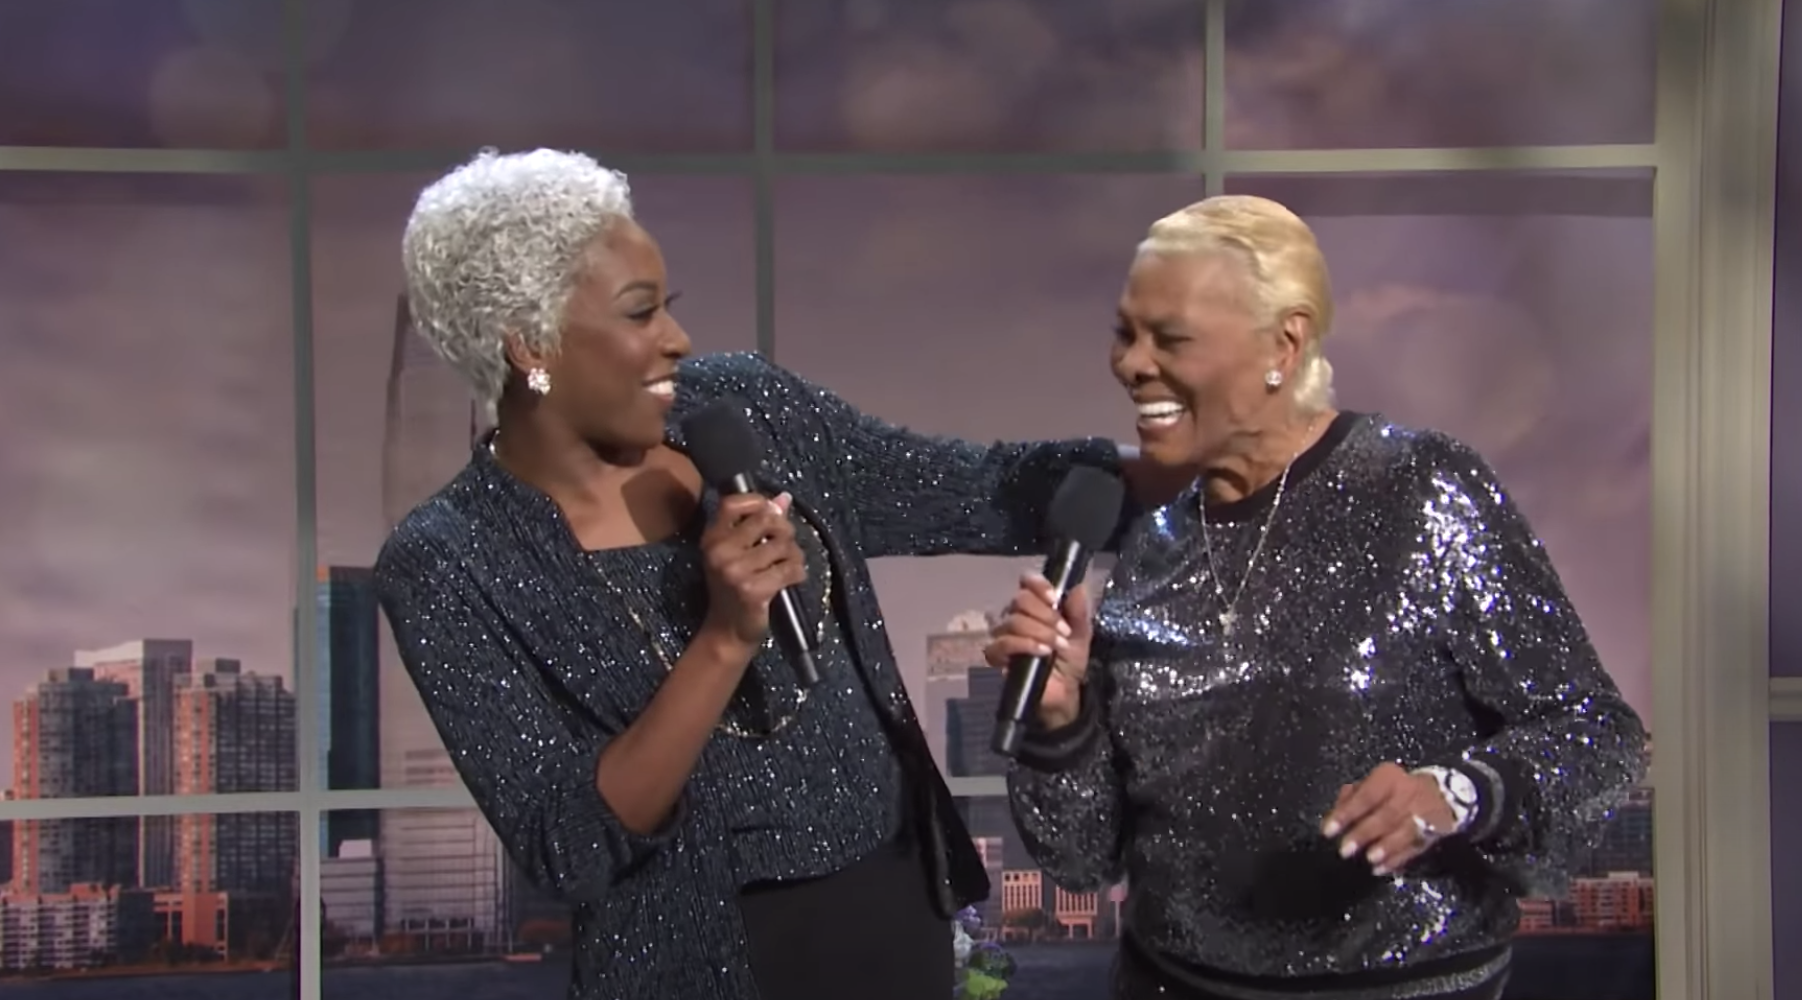 &quot;Dionne&quot; and Dionne&quot; singing together and smiling